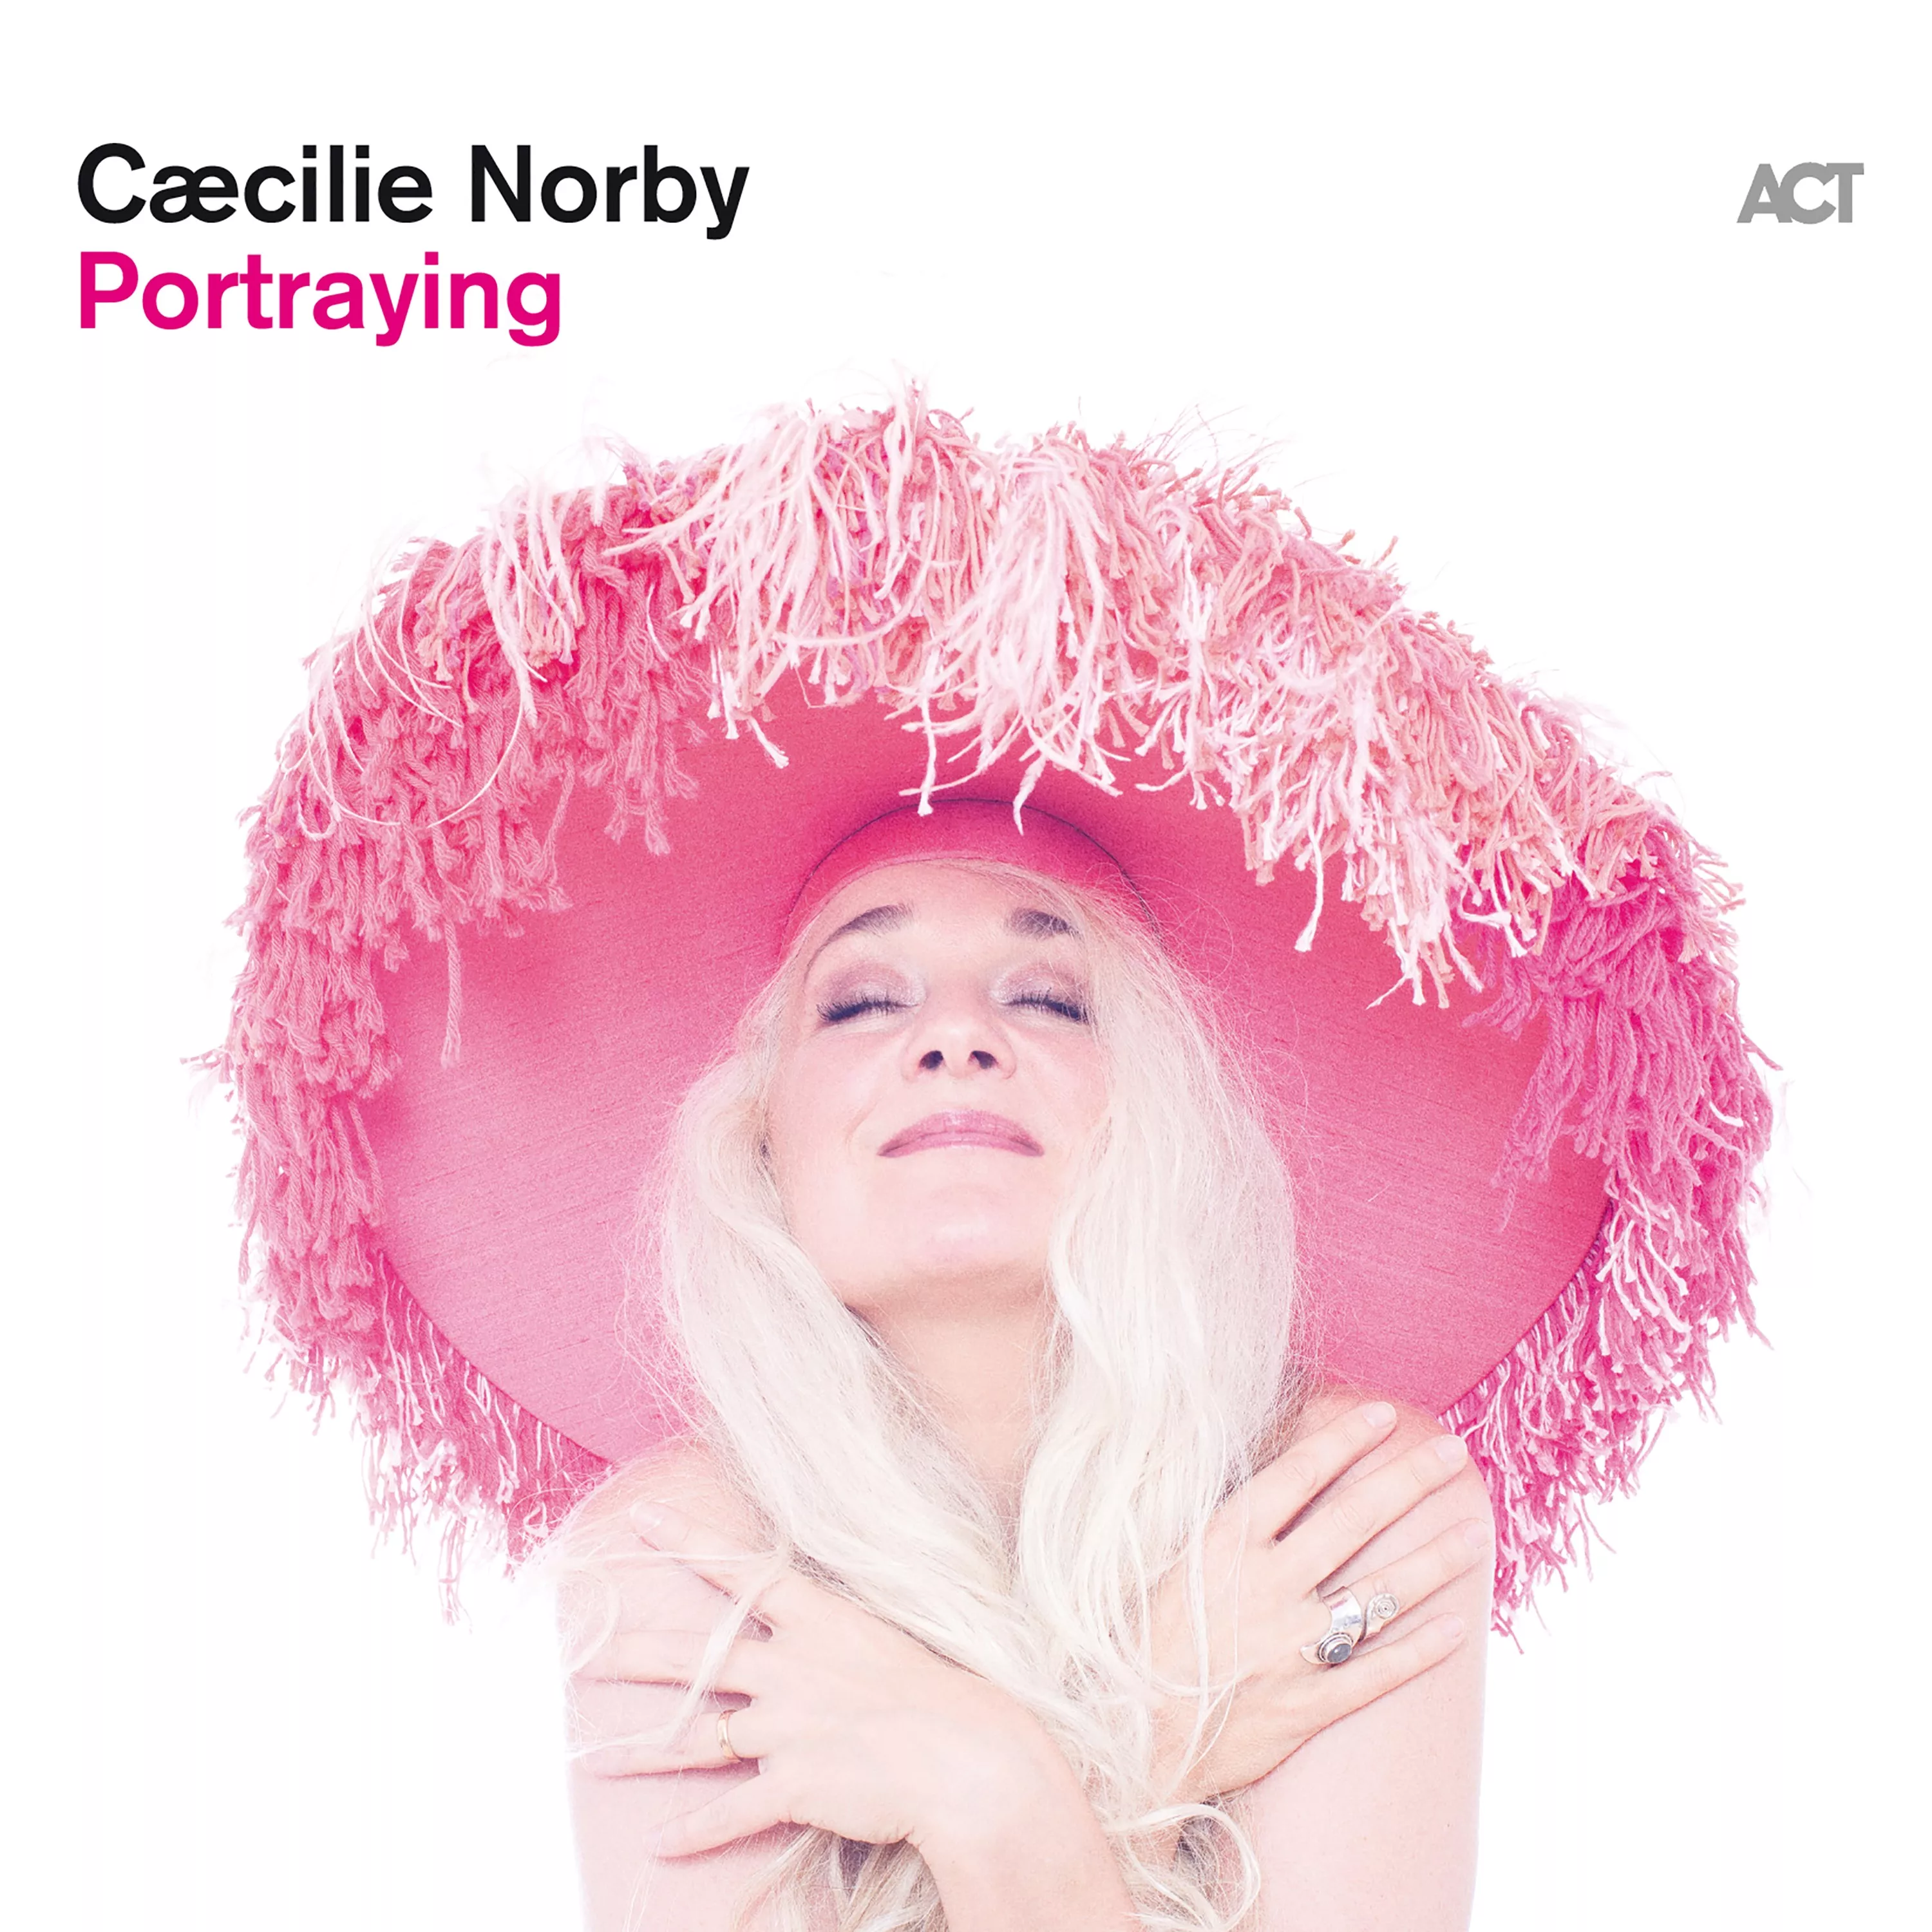 Portraying - Cæcilie Norby